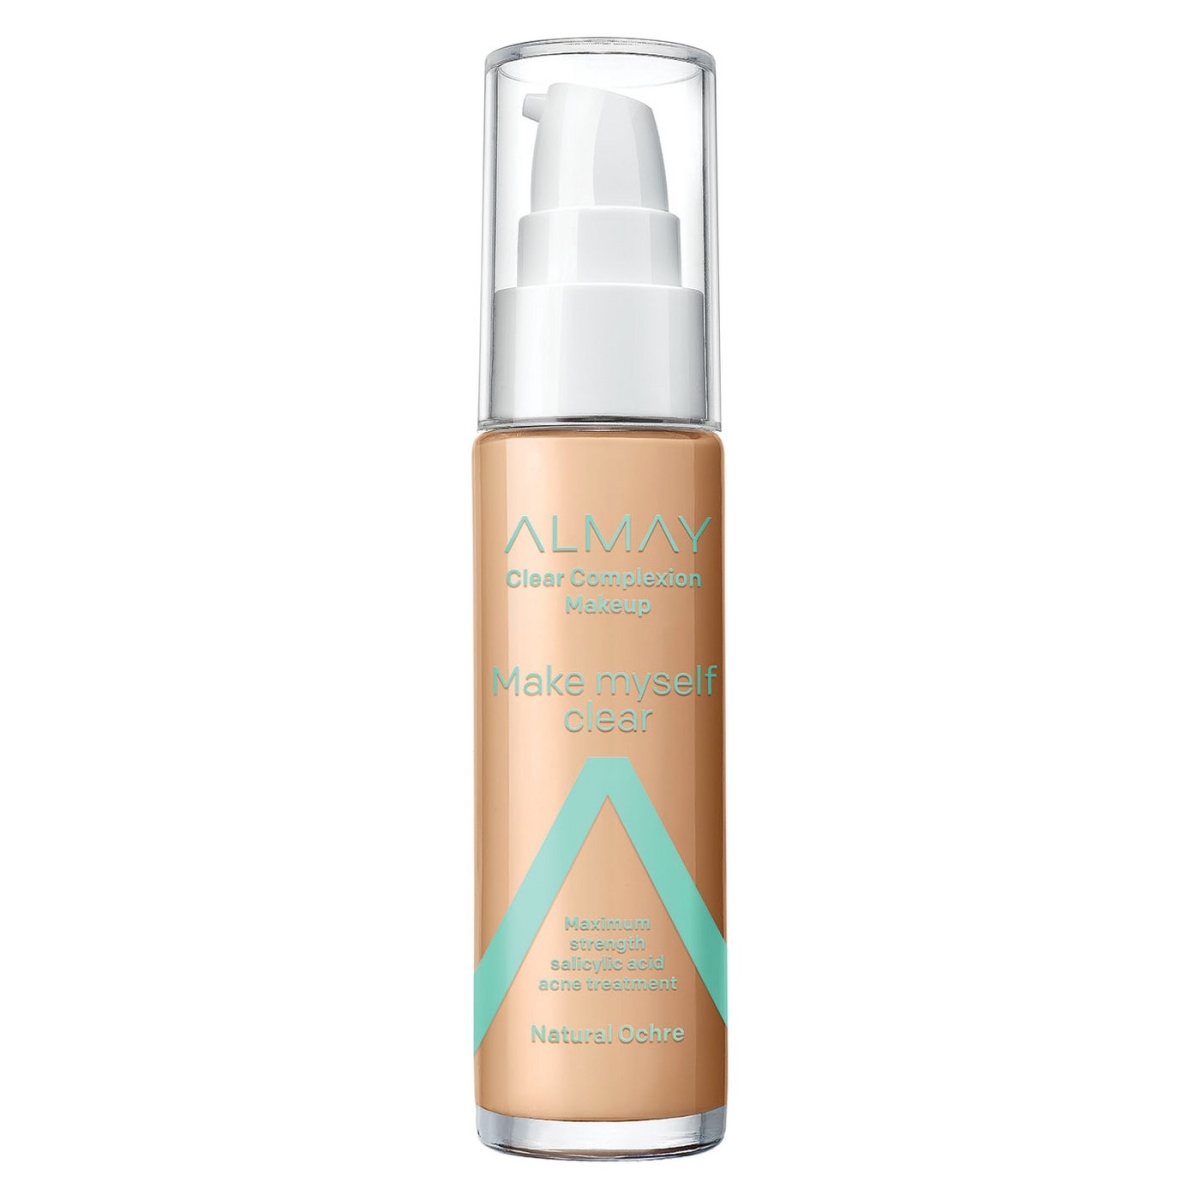 43132636 Almay Clear Complexion Foundation - 510 Natural Och, Pack Of 2